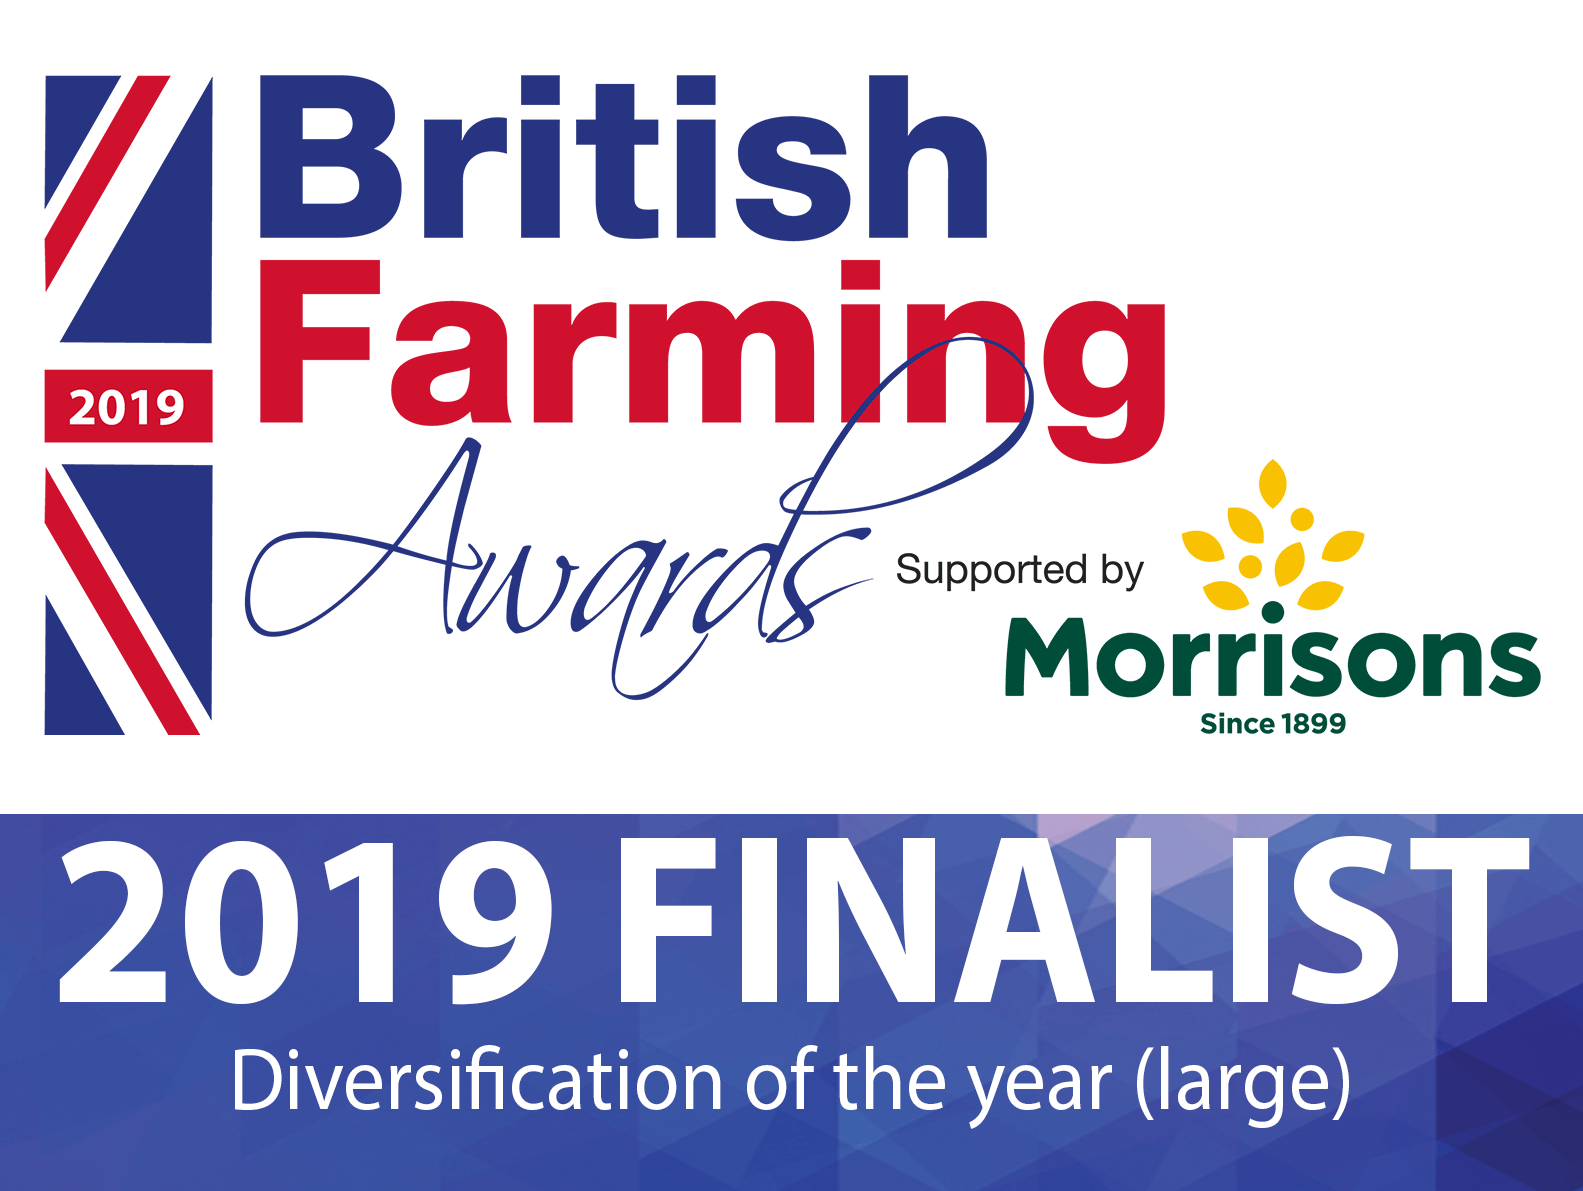 Deepdale Farm has been nominated for a British Farming Award - Diversification Innovator of the Year (large) Award